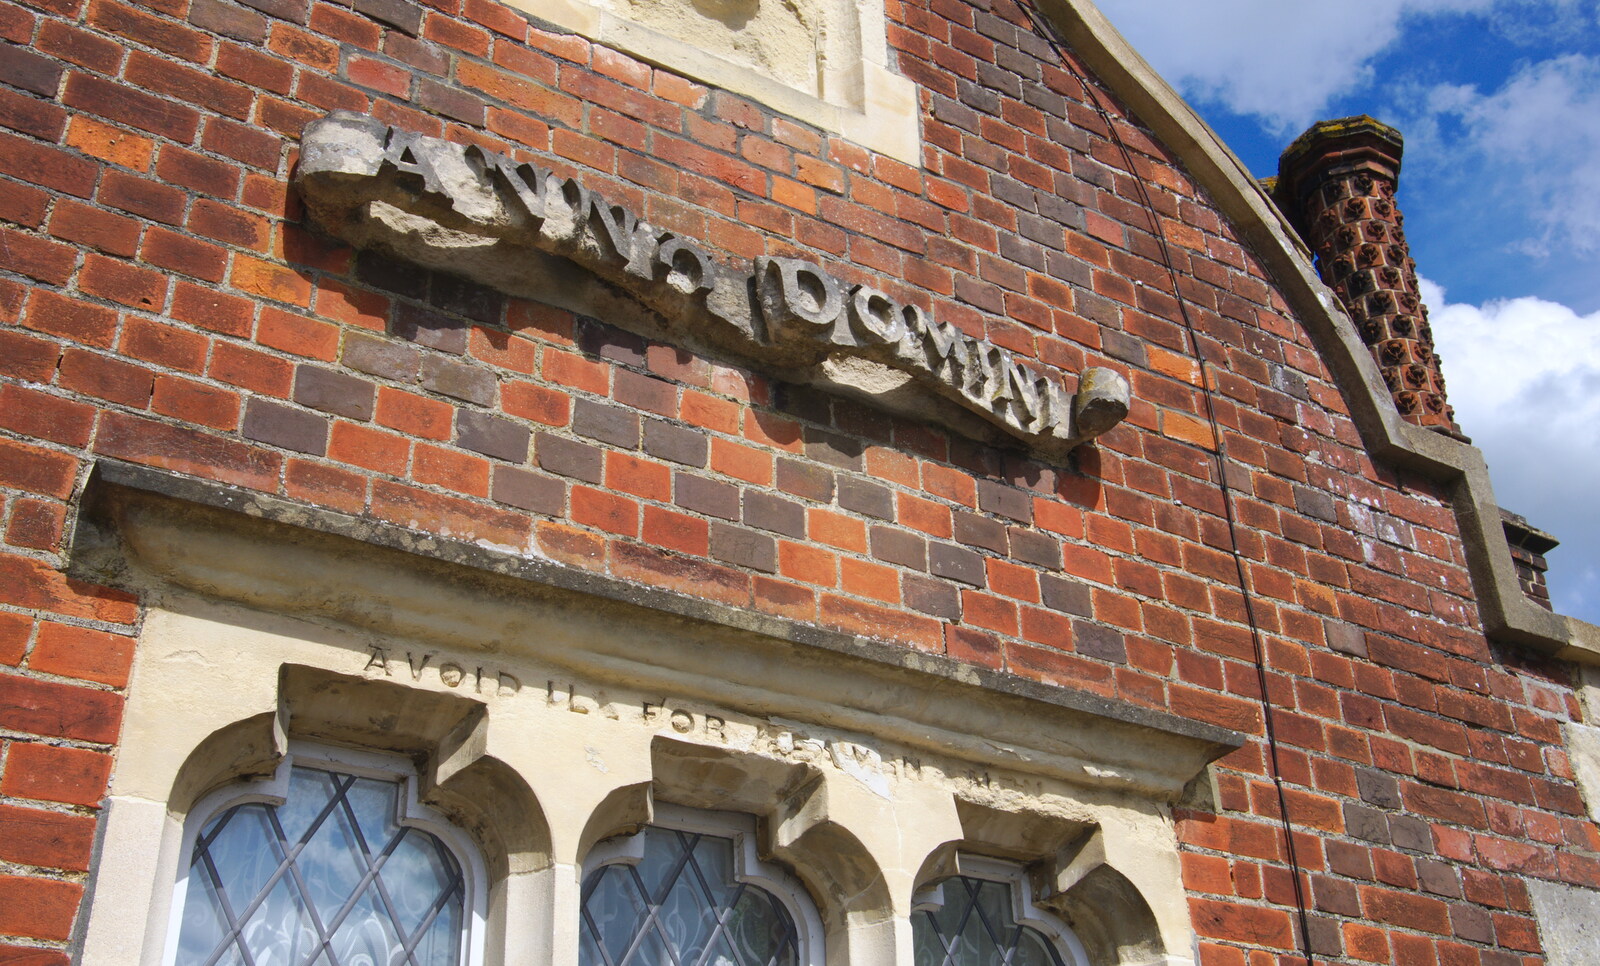 Stone lettering on an old school from The Diss Carnival 2019, Diss, Norfolk - 9th June 2019